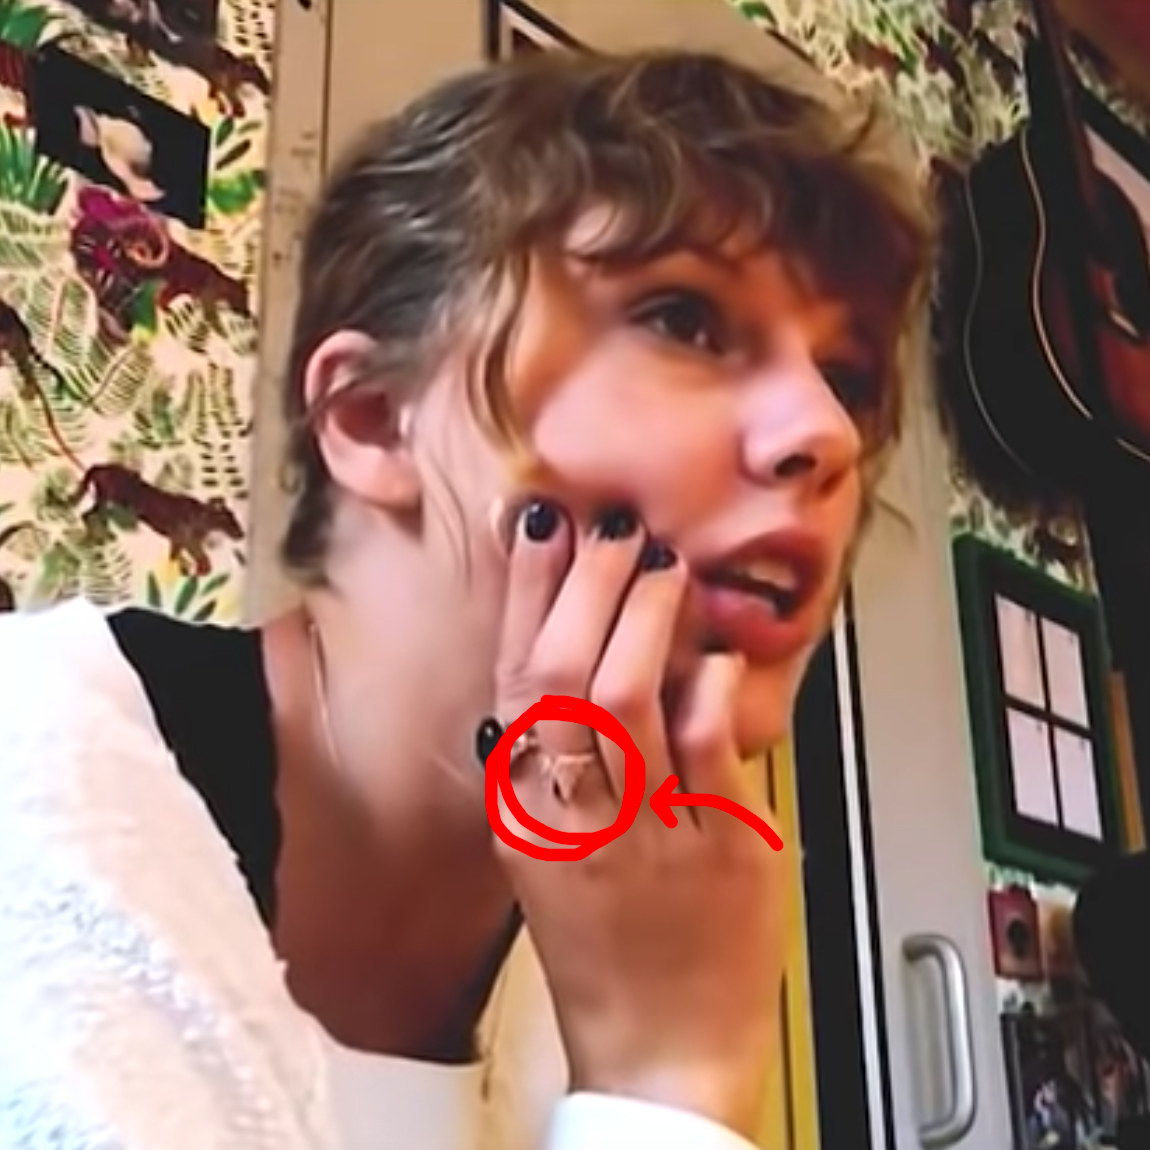 Heres Why Everyones Freaking Out Over This Photo Of Taylor